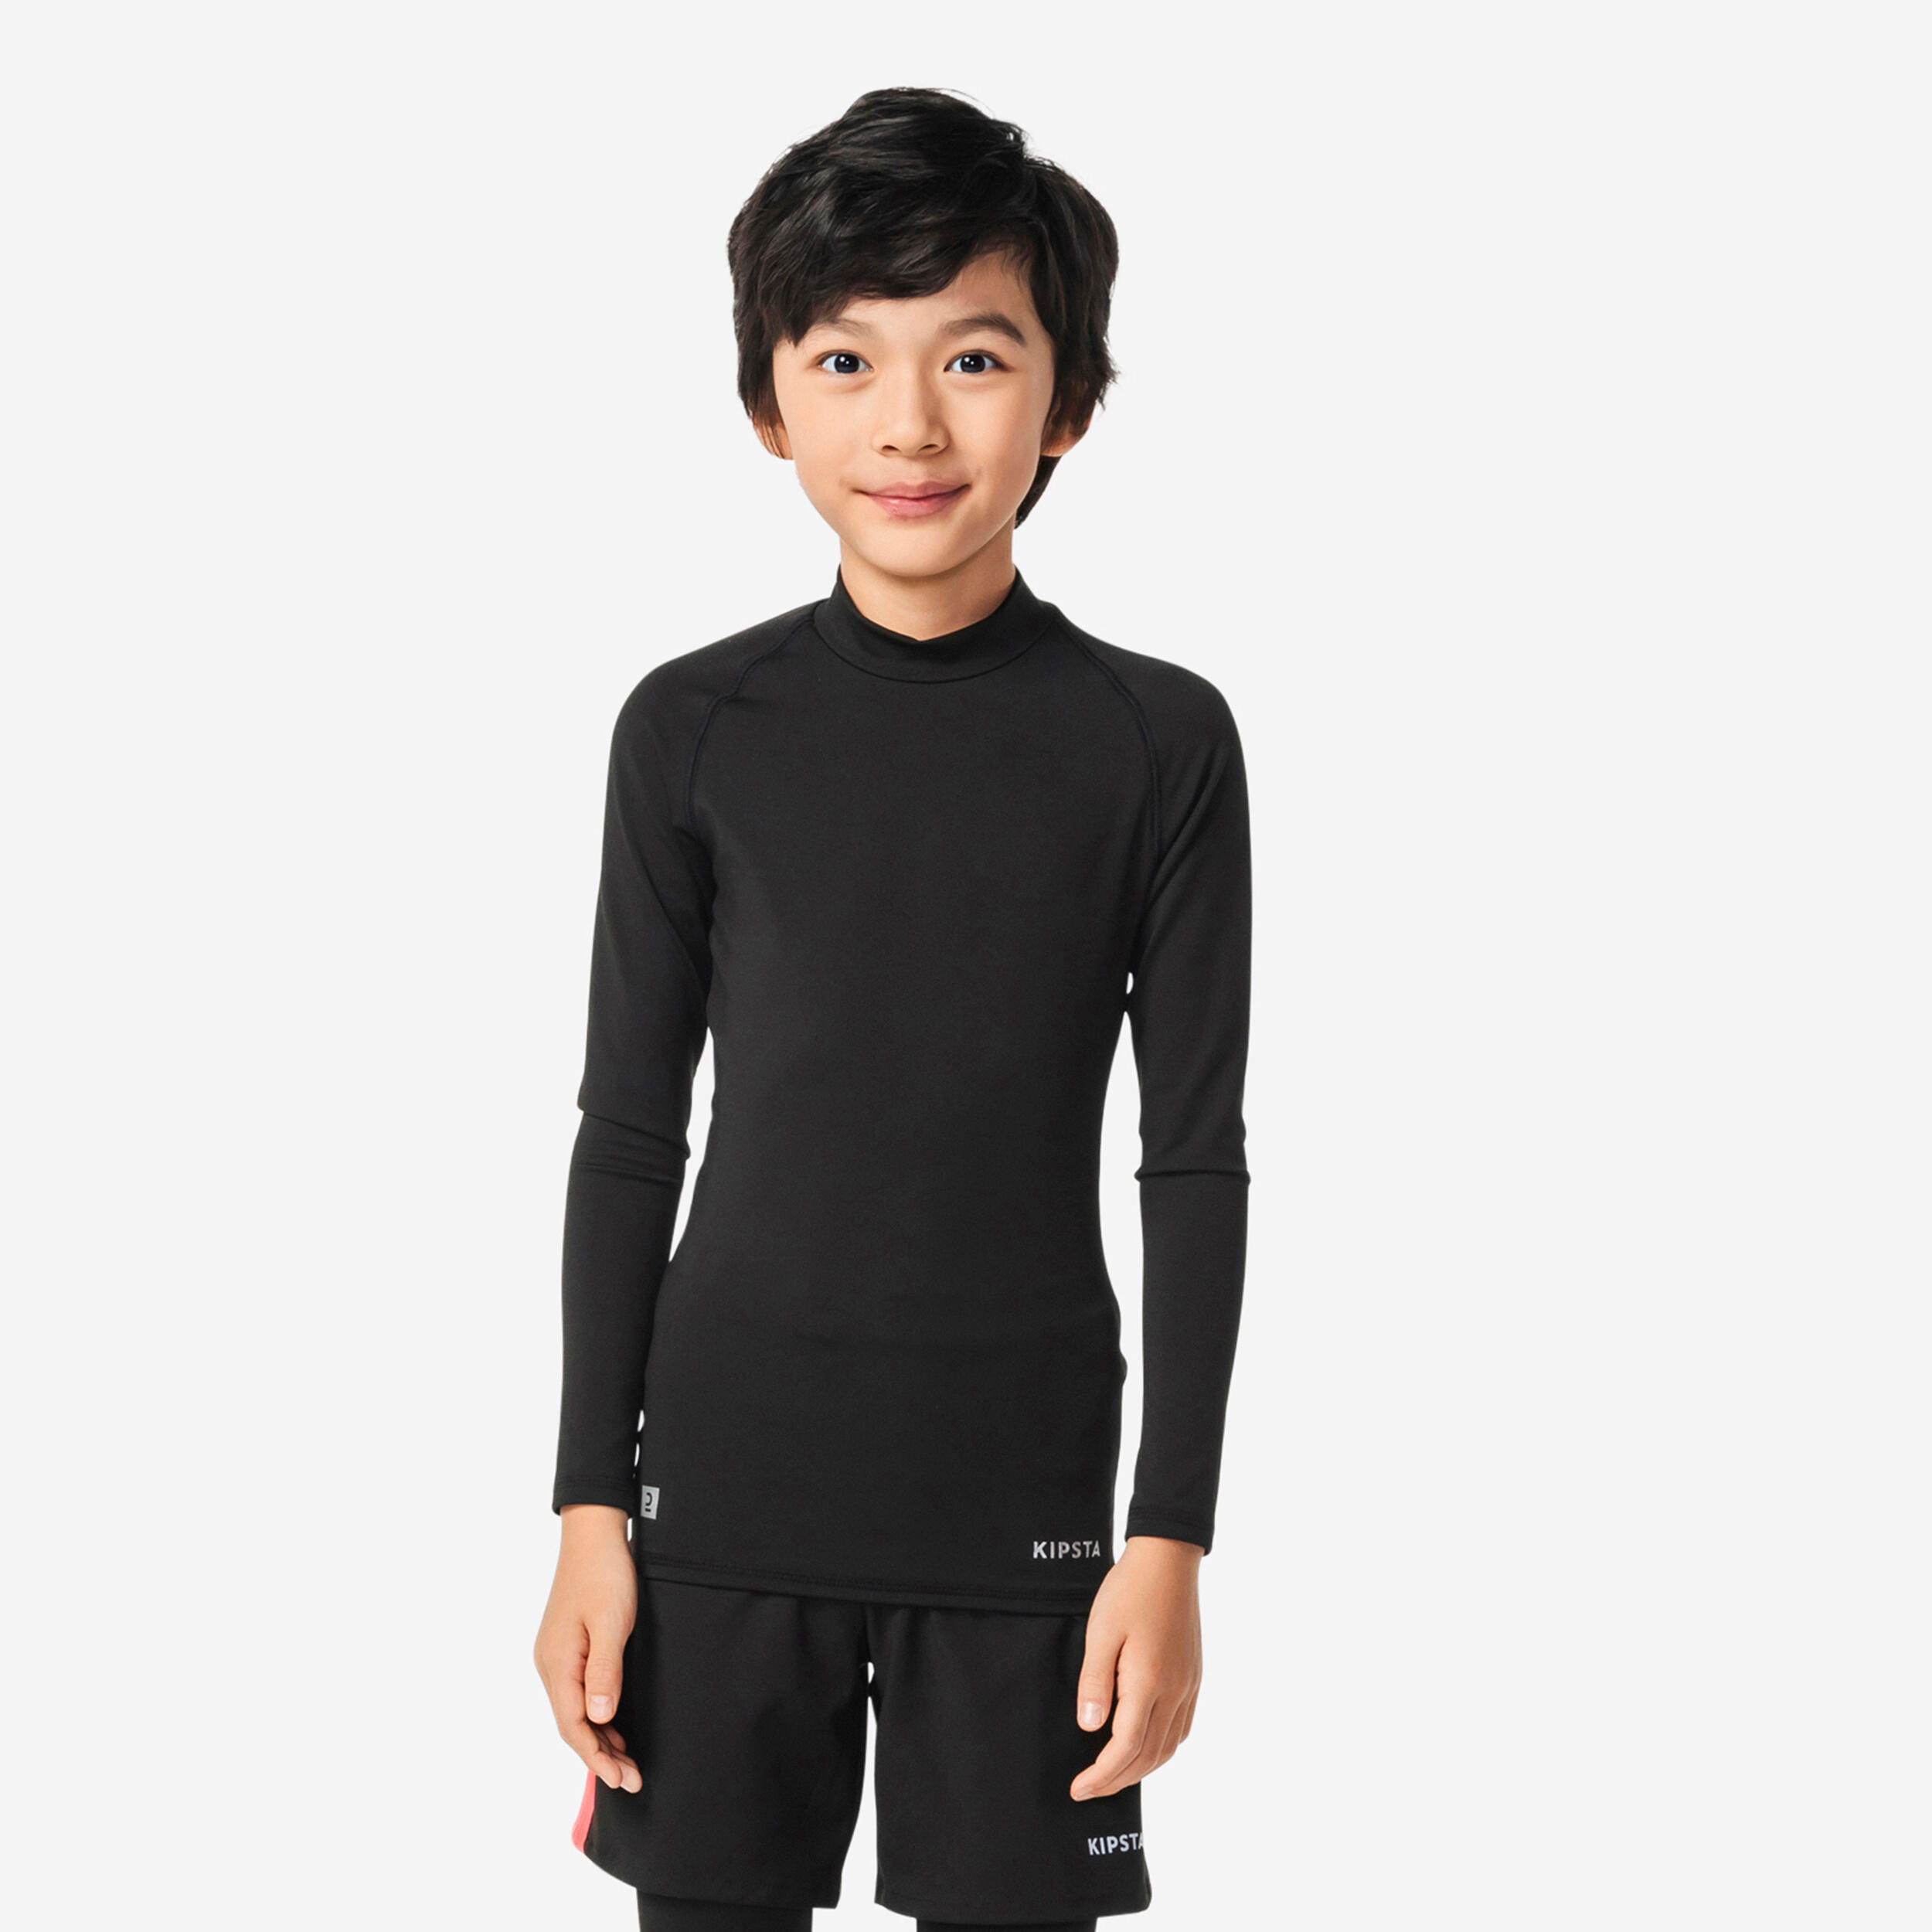 LS Thermal Base Layer Top - Keepdry 500 White - Snow white, Iced